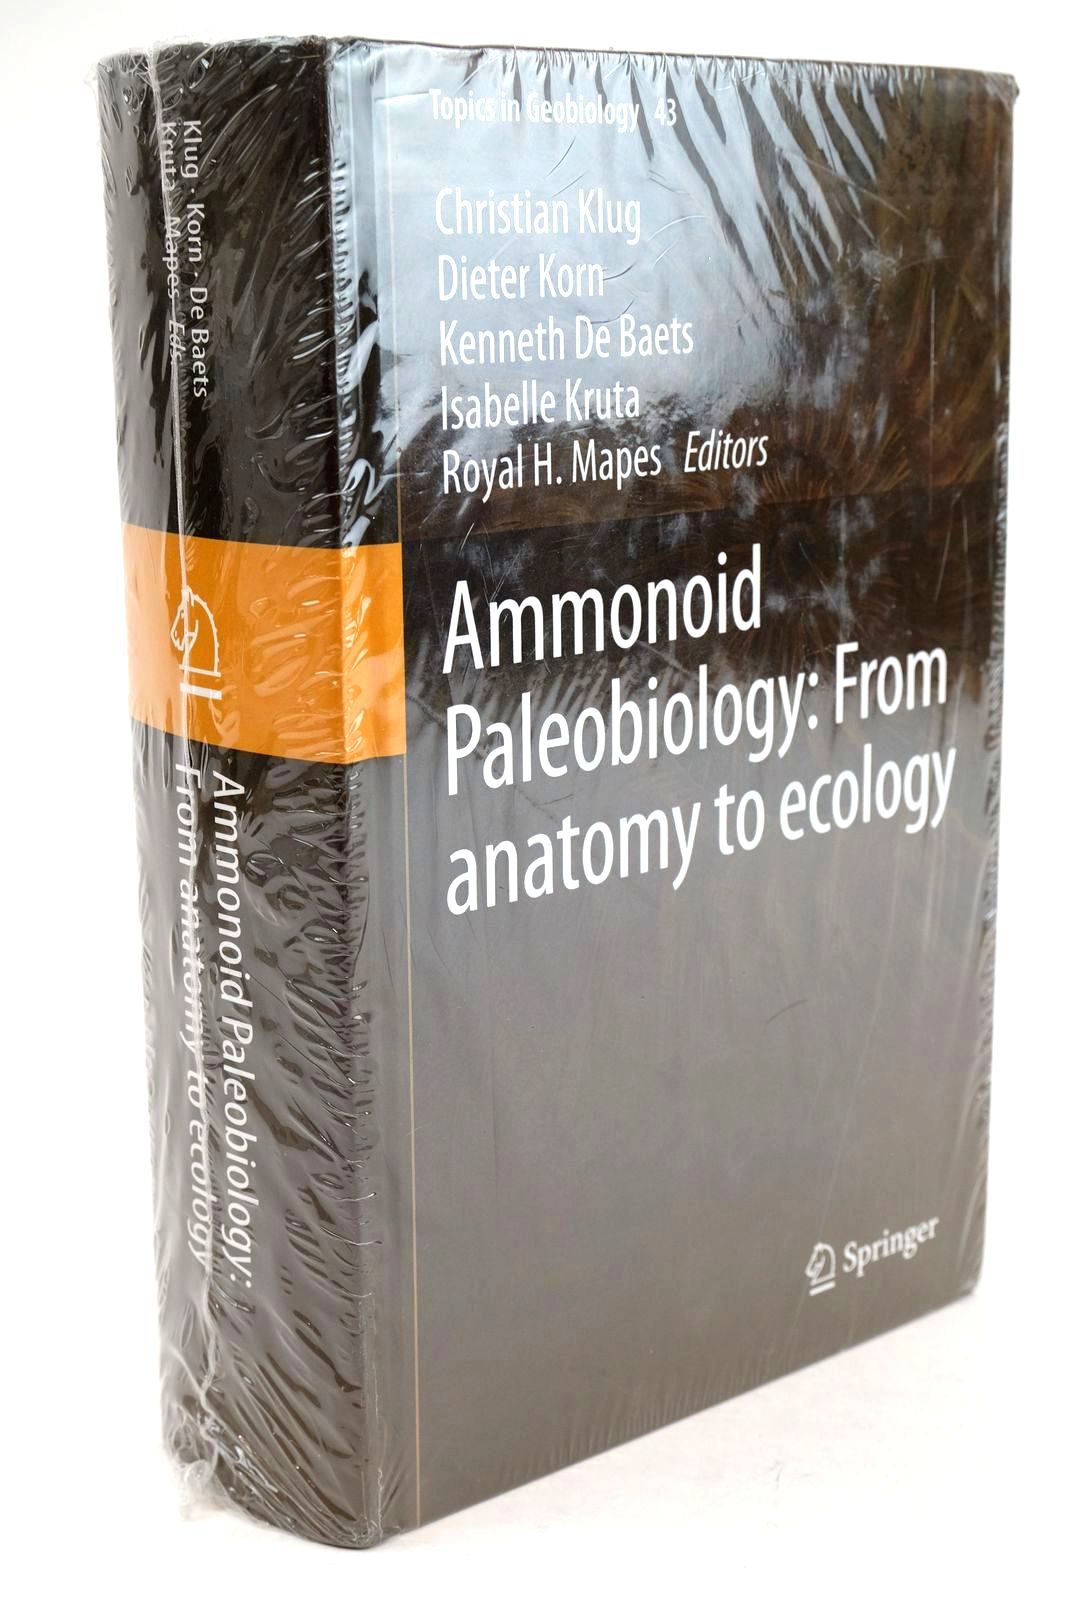 Photo of AMMONOID PALEOBIOLOGY: FROM ANATOMY TO ECOLOGY written by Klug, Christian Korn, Dieter De Baets, Kenneth Kruta, Isabelle Hapes, Royal H. published by Springer (STOCK CODE: 1324147)  for sale by Stella & Rose's Books